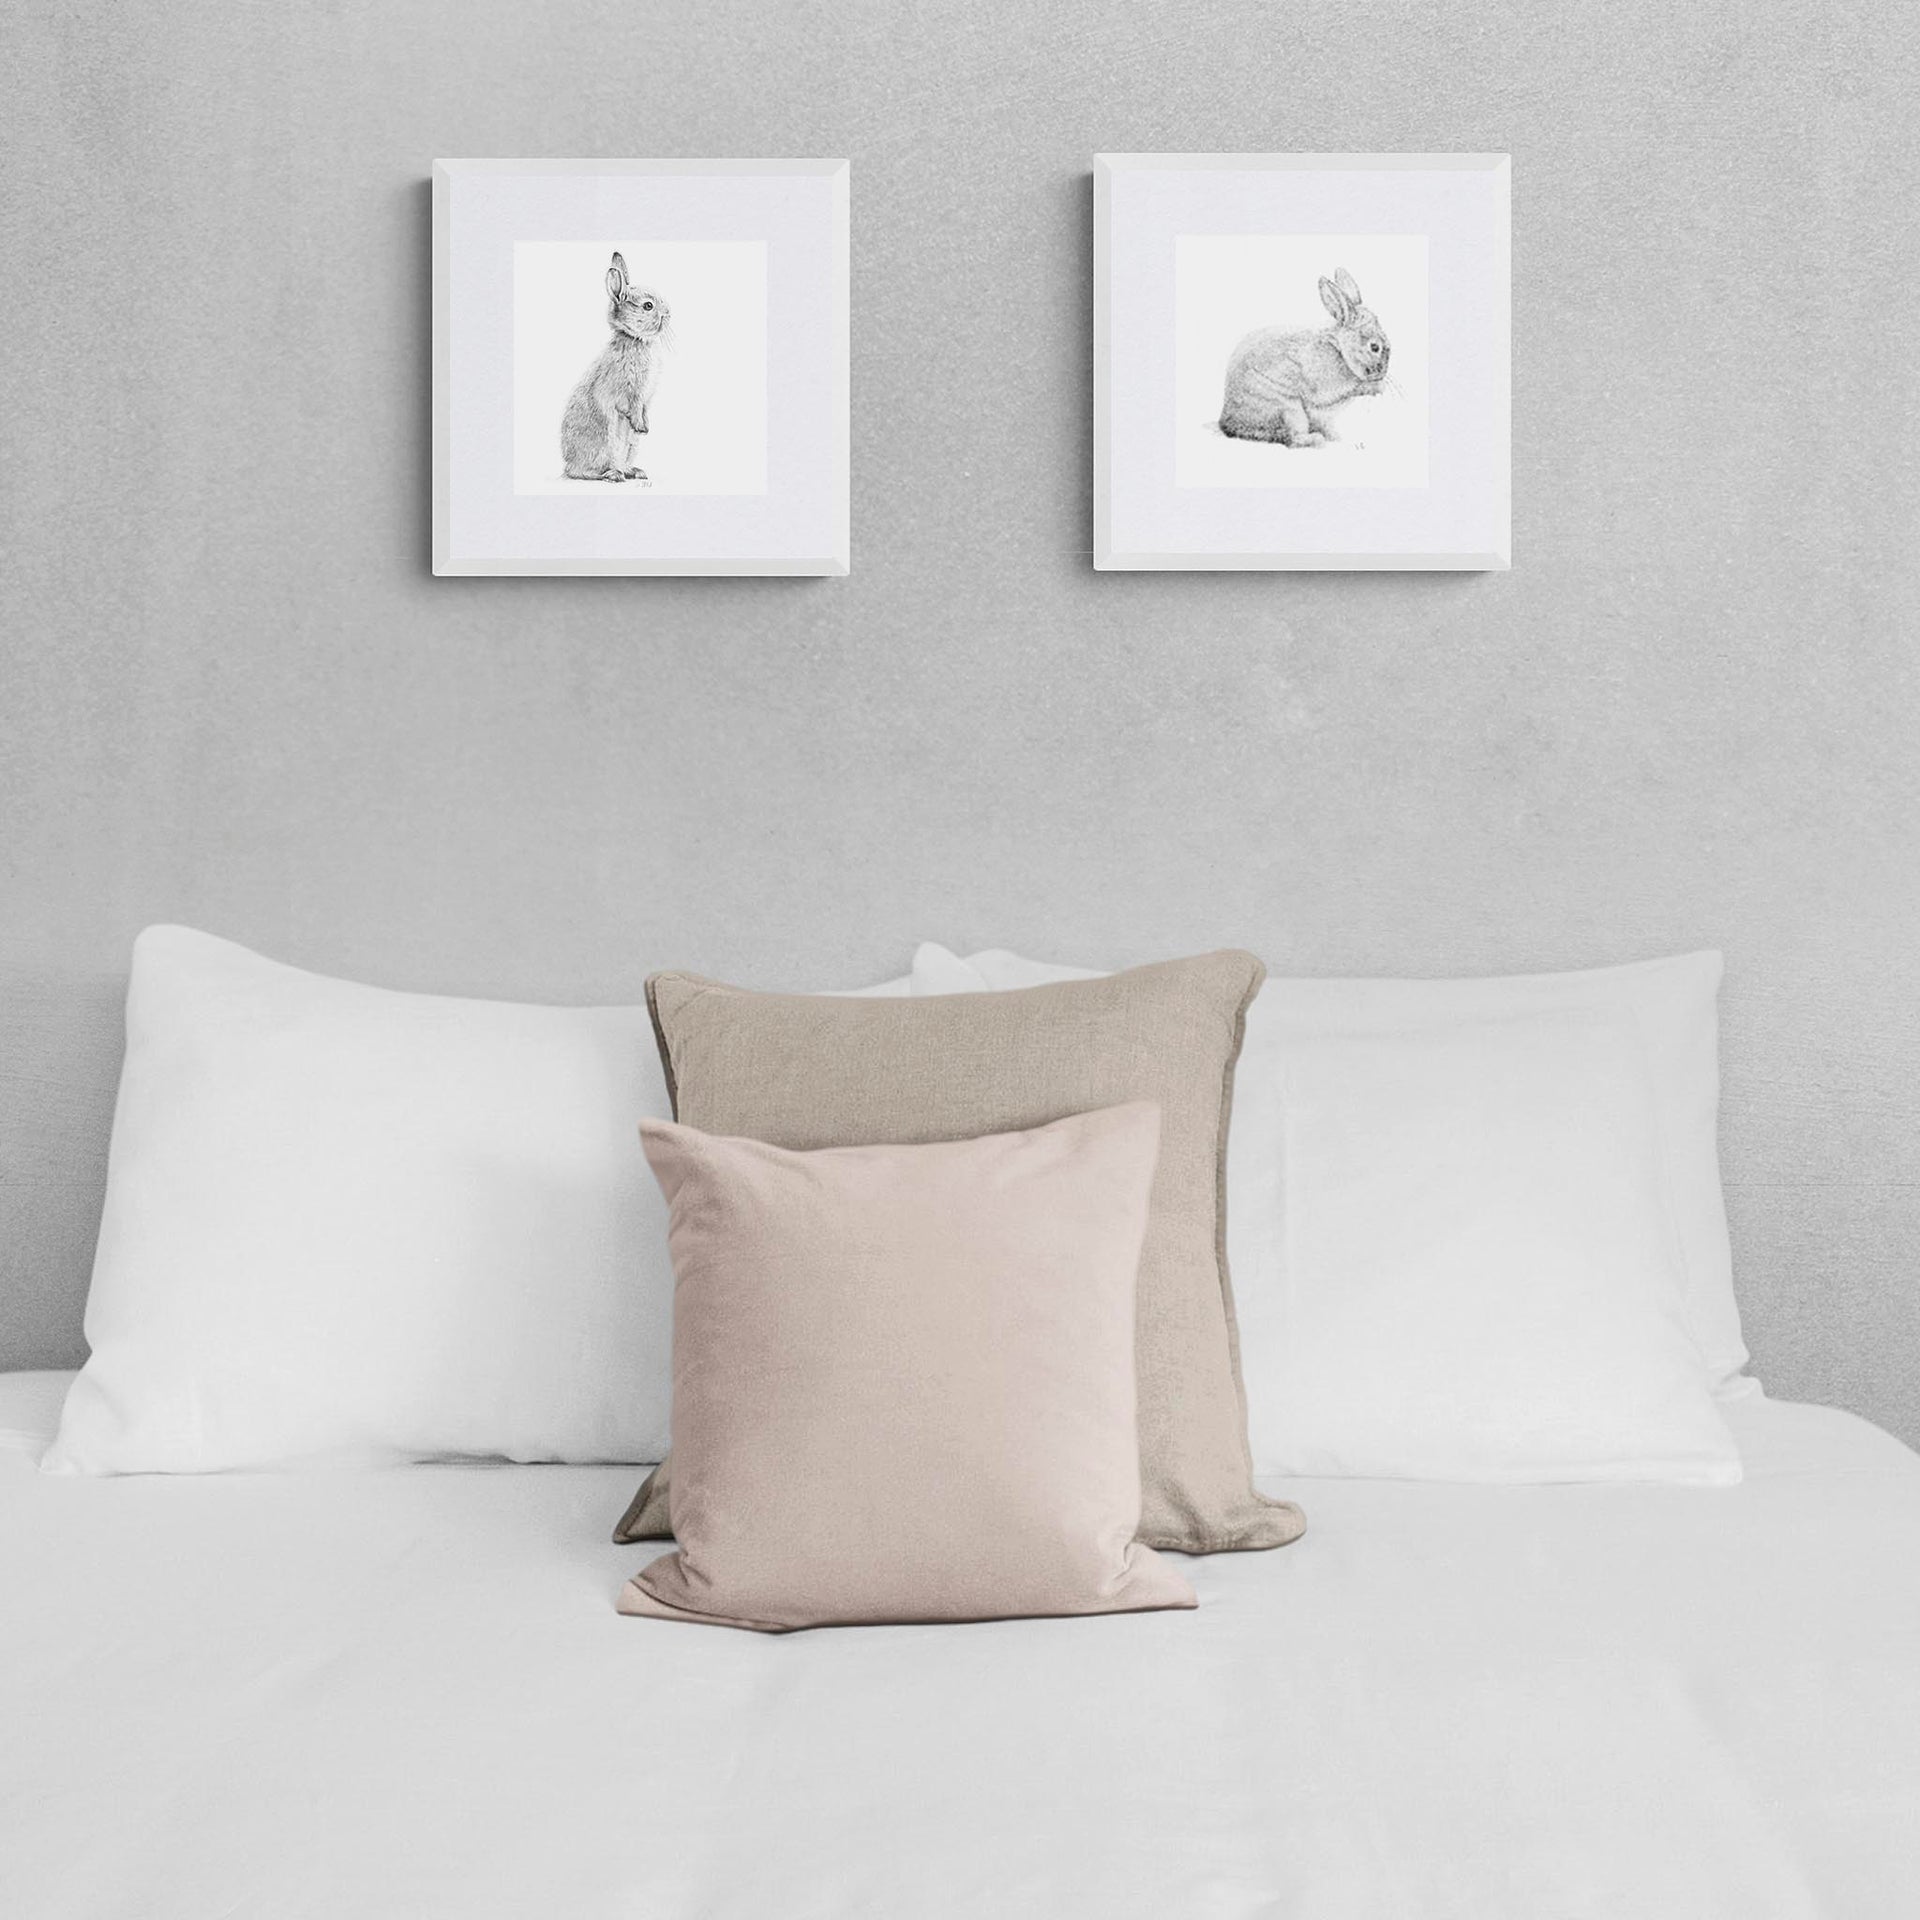 Giclée bunny pencil drawing prints on the wall